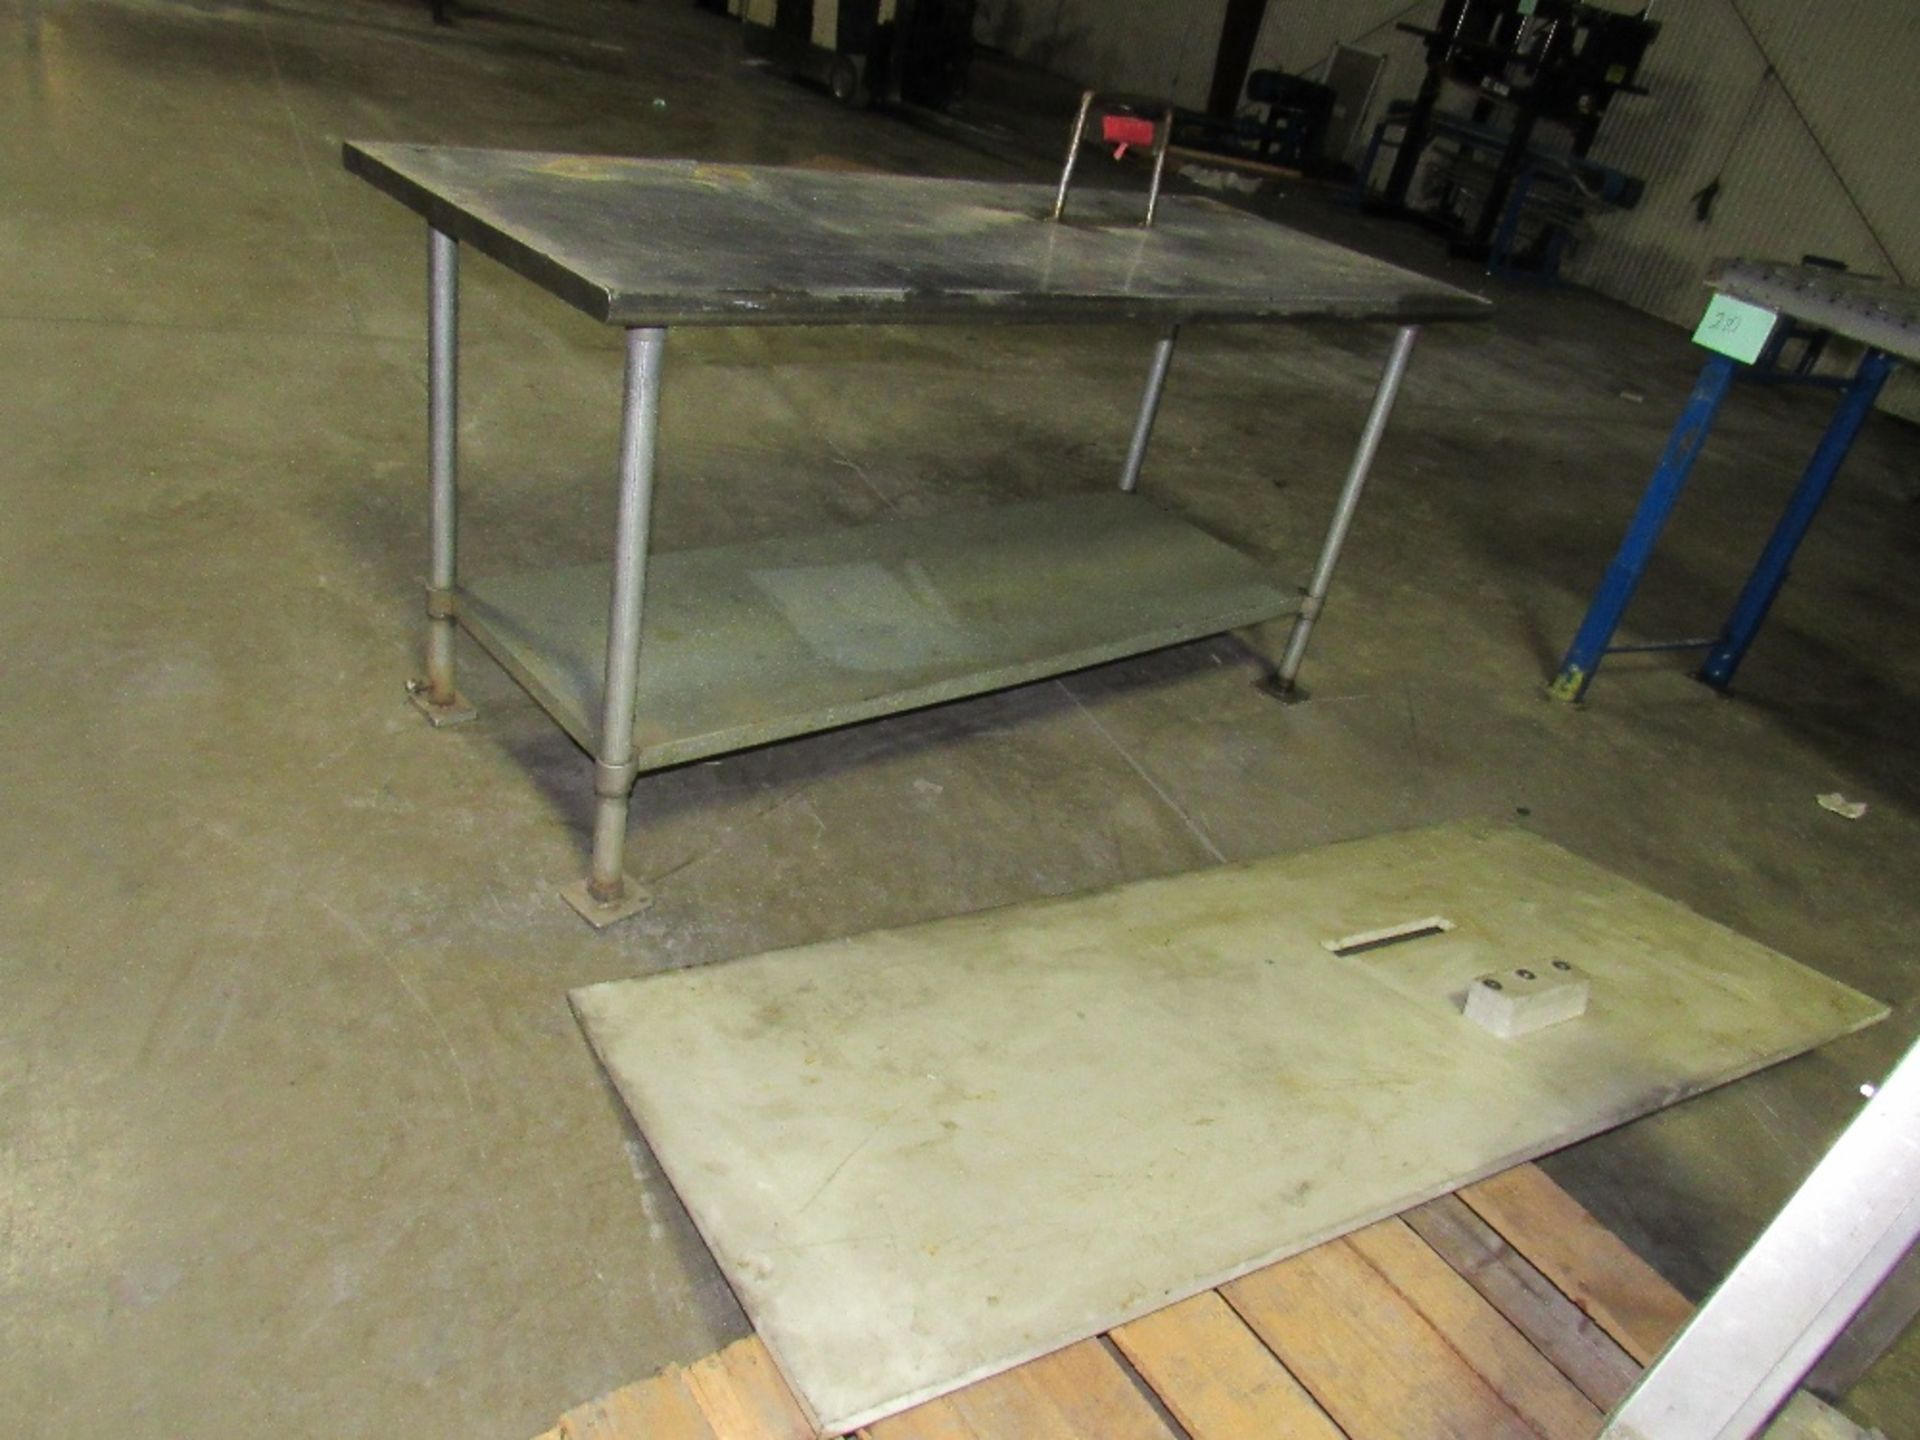 Stainless Steel Table with Teflon removable Plate Cover - Galvanized second surface -- (RIGGING - Image 11 of 14